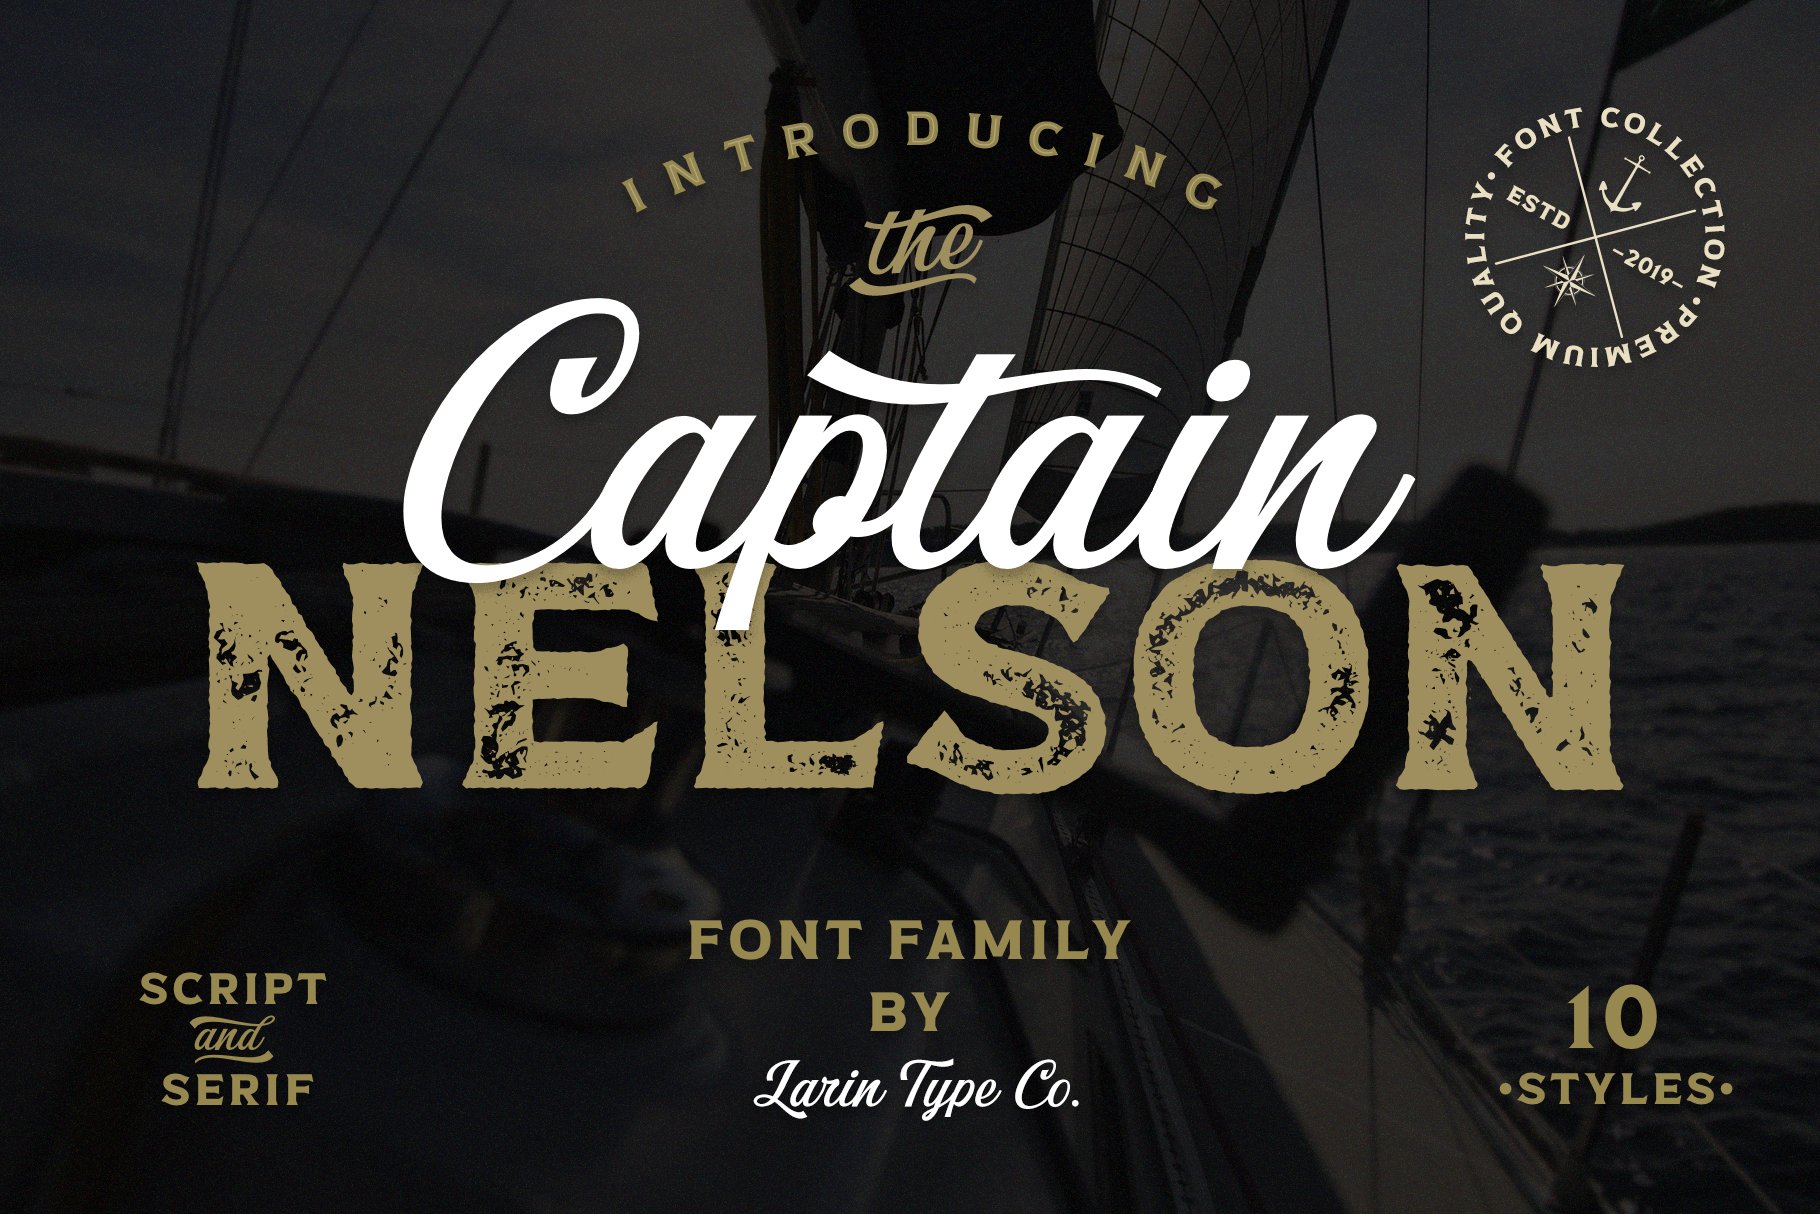 Captain Nelson cover image.